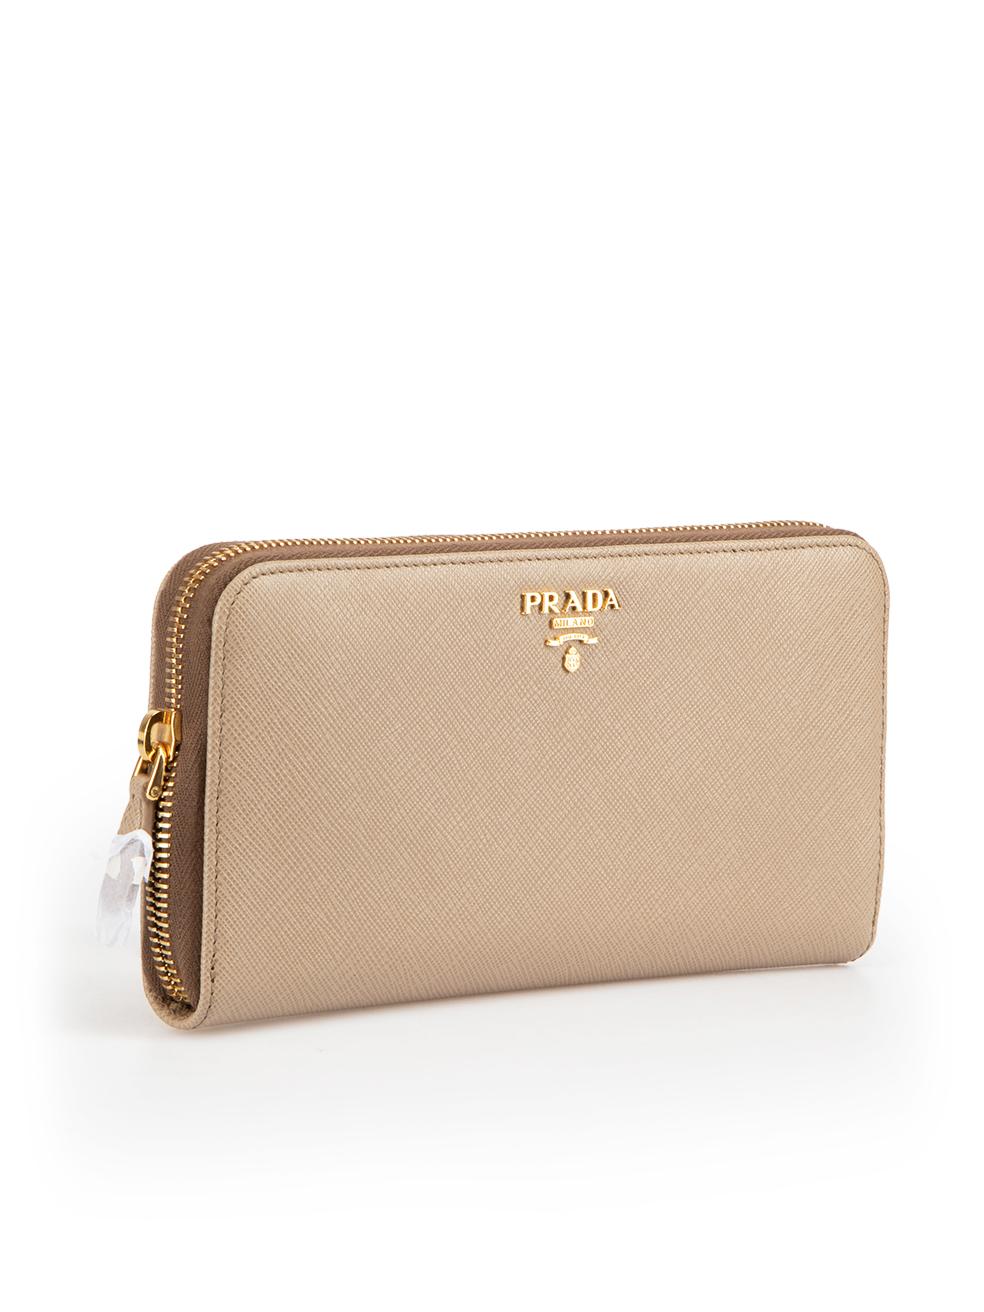 CONDITION is Never worn. No visible wear to the wallet is evident on this new Prada designer resale item. This item comes with an original box.
 
 
 
 Details
 
 
 Beige
 
 Saffiano leather
 
 Wallet
 
 Gold tone logo detail
 
 Zip fastening
 
 3x